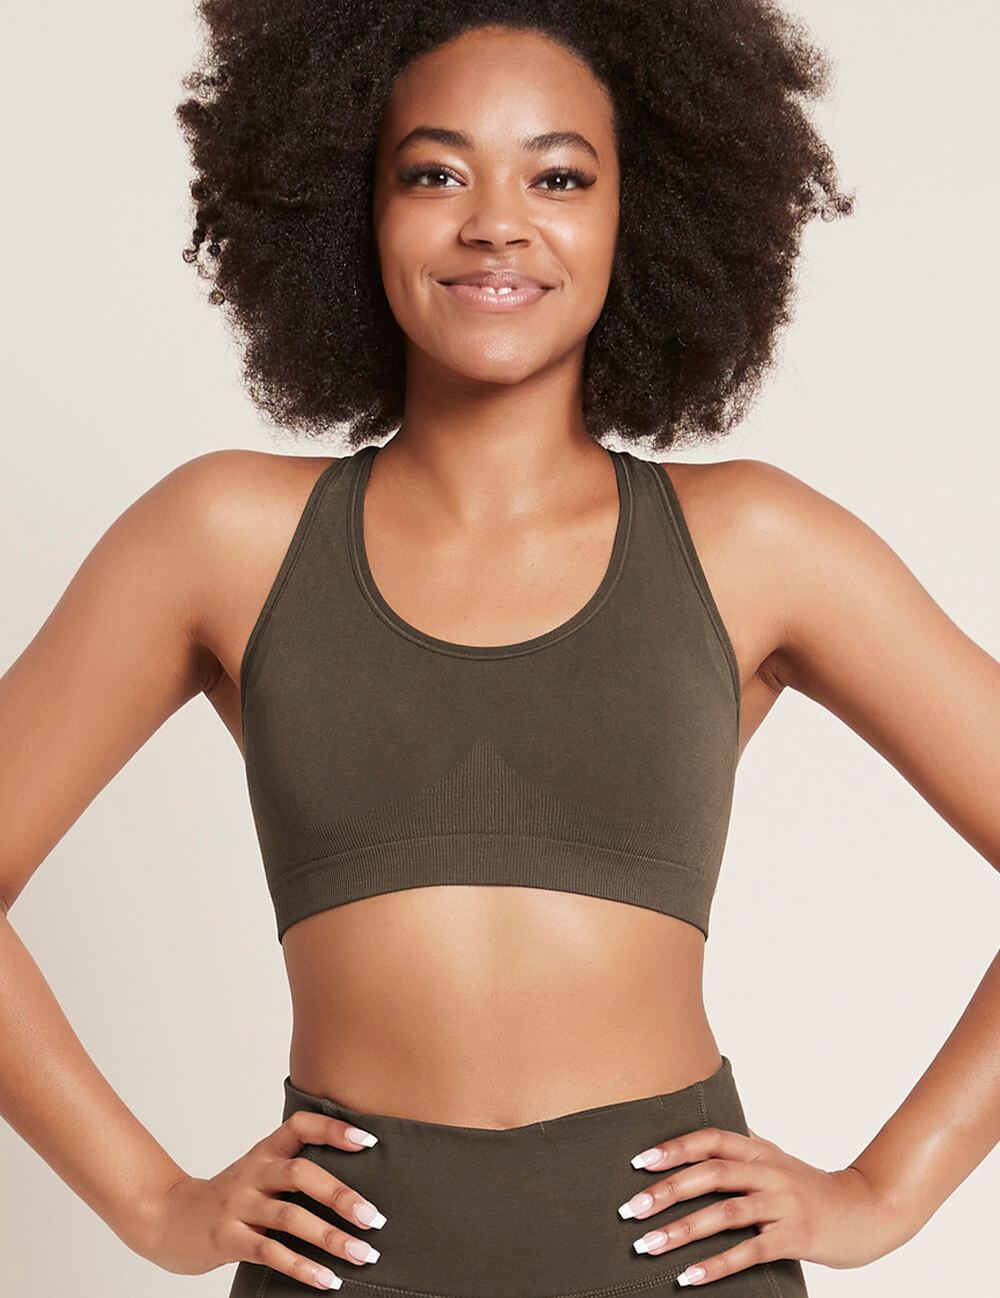 Clearance: Olive Street Racerback Bras (6-Pack) (Size 34A)